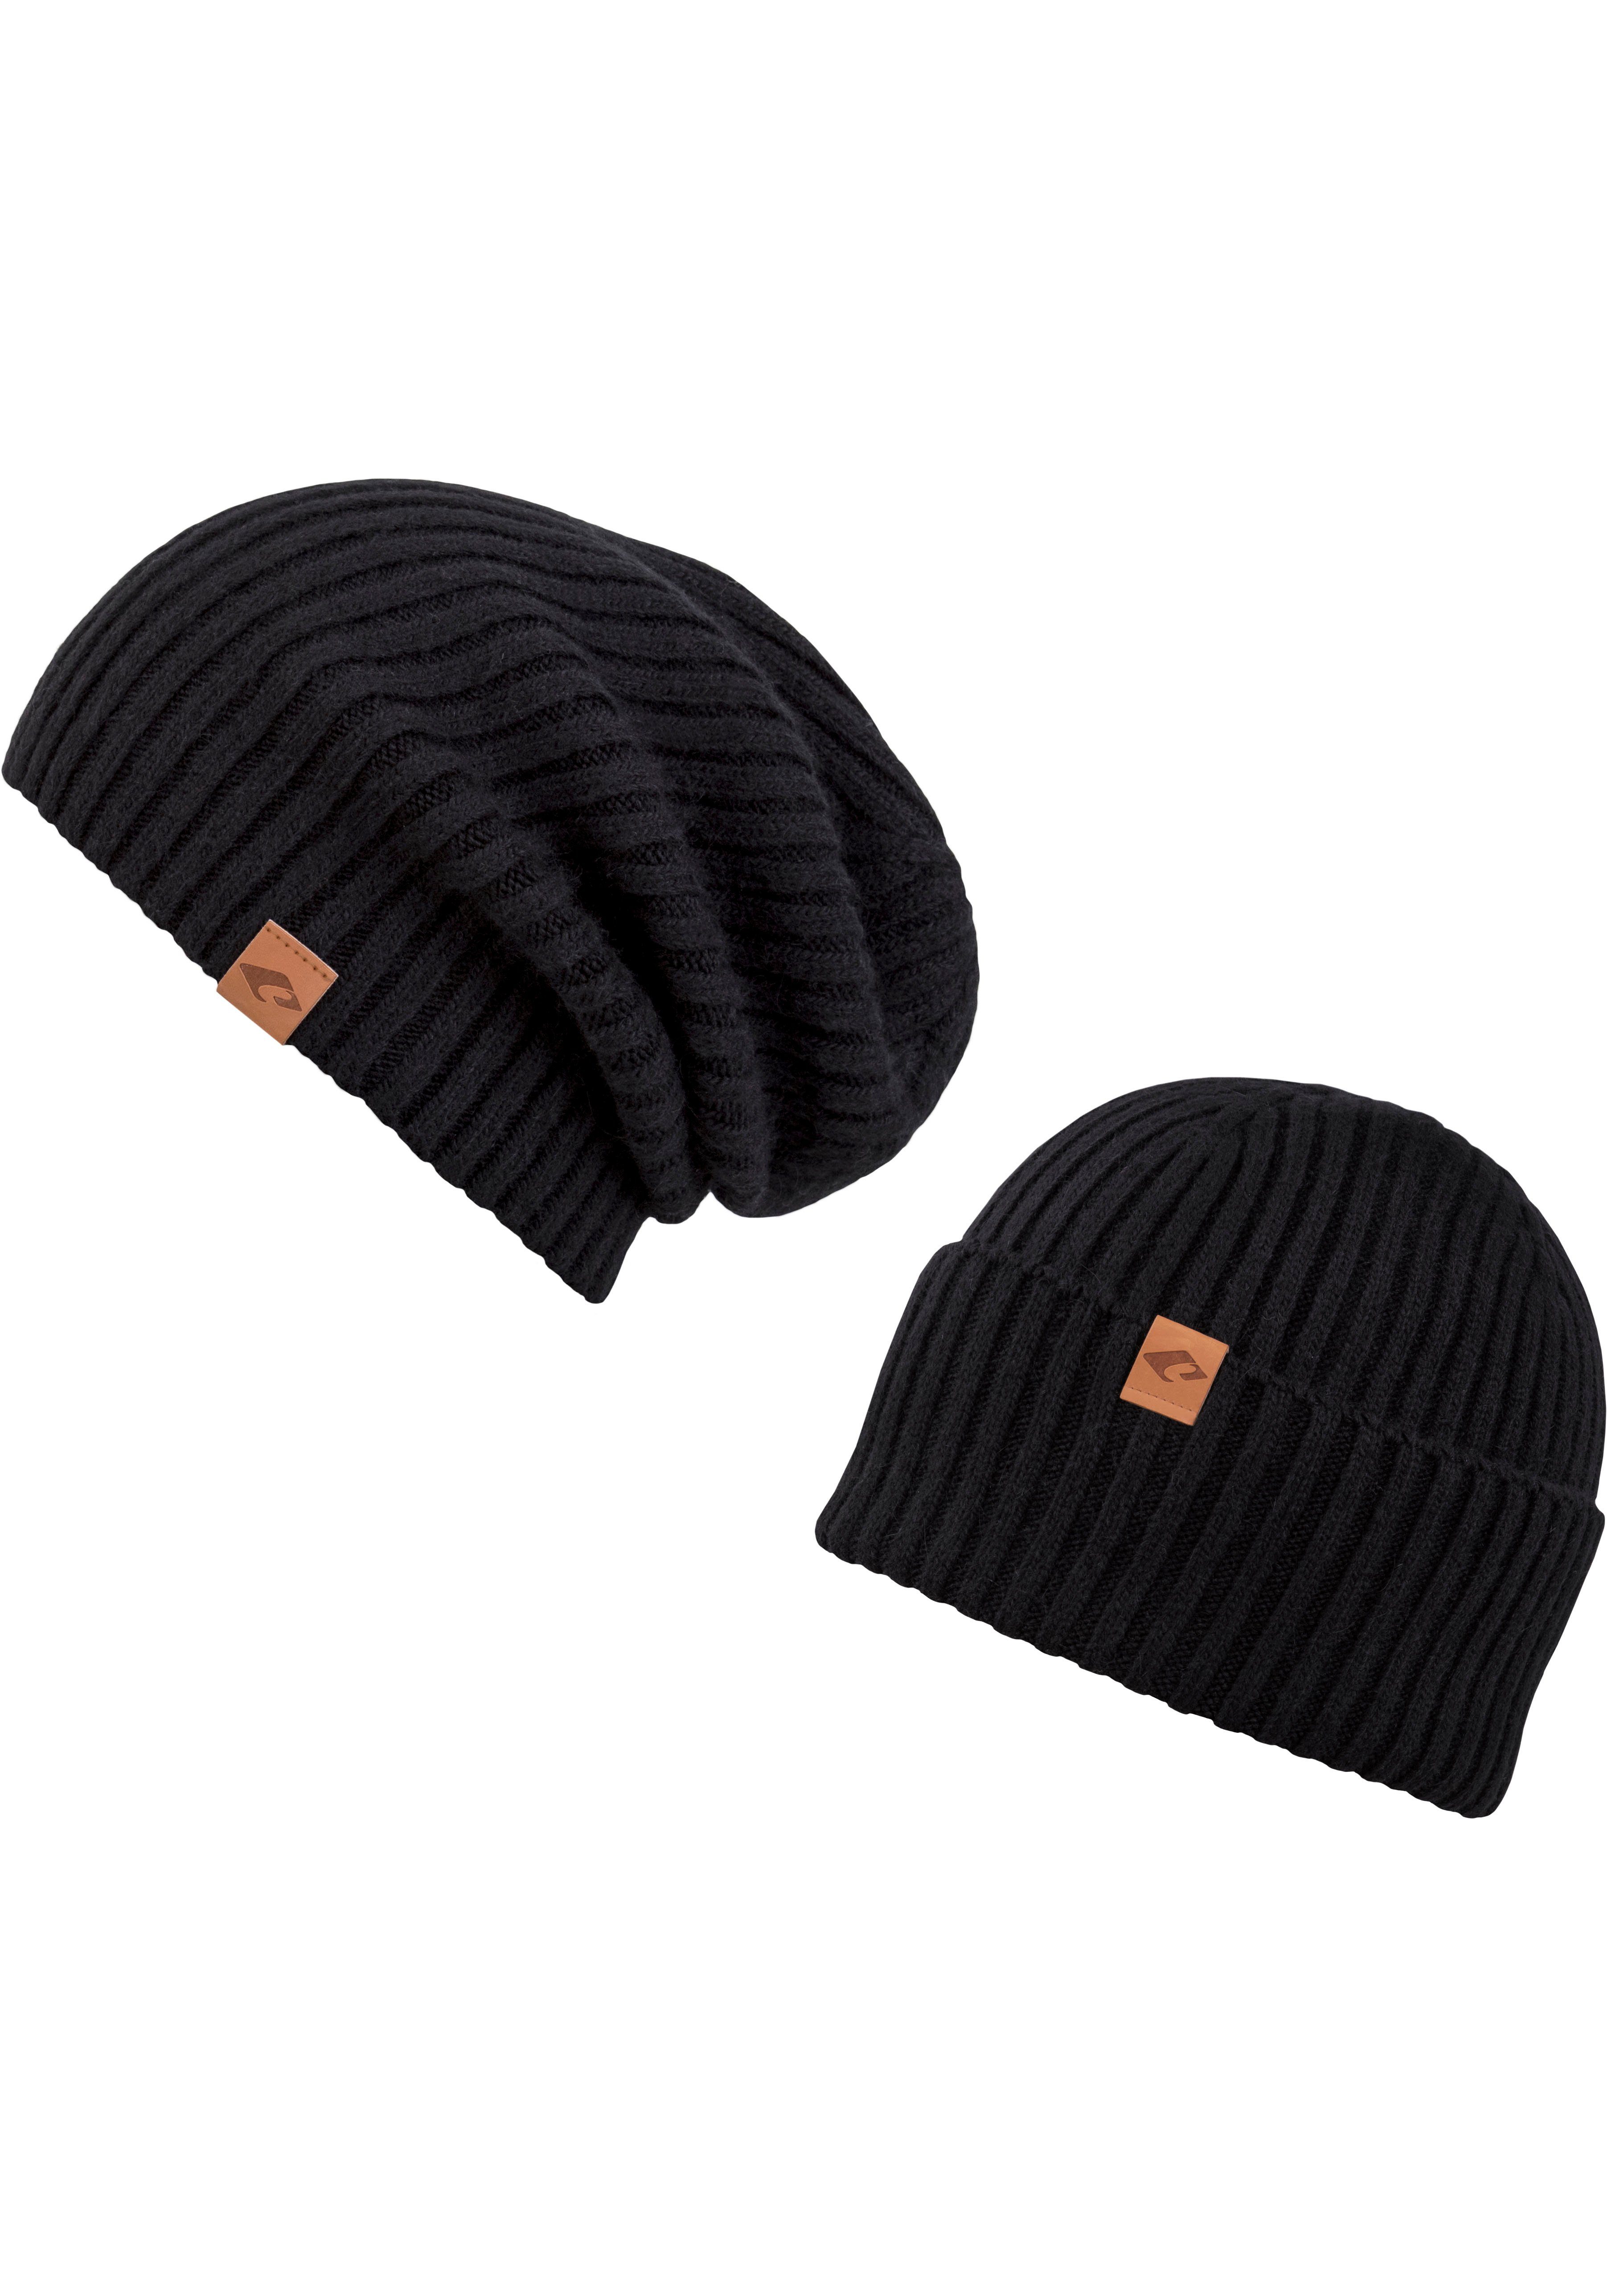 Hat Justin chillouts Beanie black